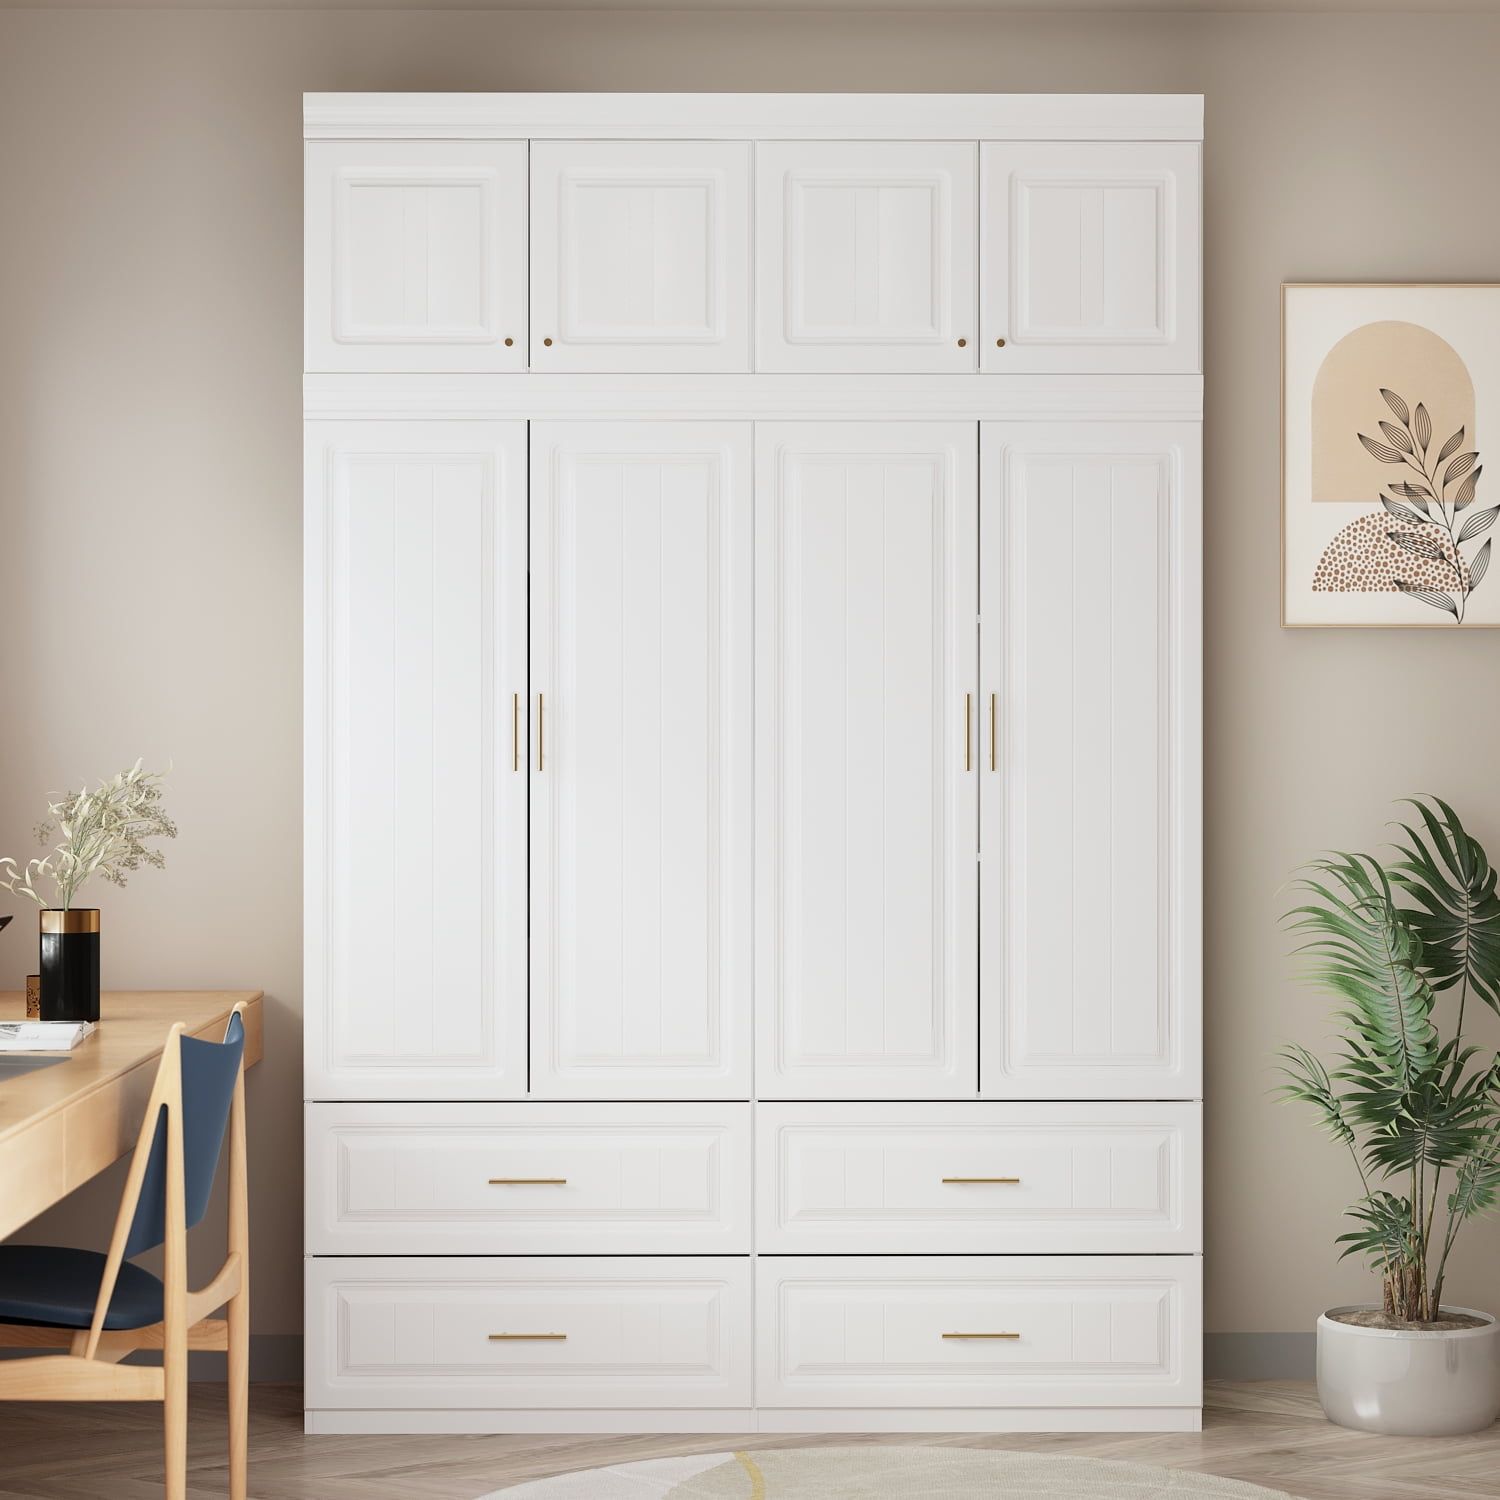 Hitow 4 Door Wardrobe Armoire With Hutch, Shelves And Drawers,white Closet  Storage Cabinet With Clothing Rod For Bedroom, 93.3" H – Walmart Within White Wood Wardrobes With Drawers (Photo 4 of 15)